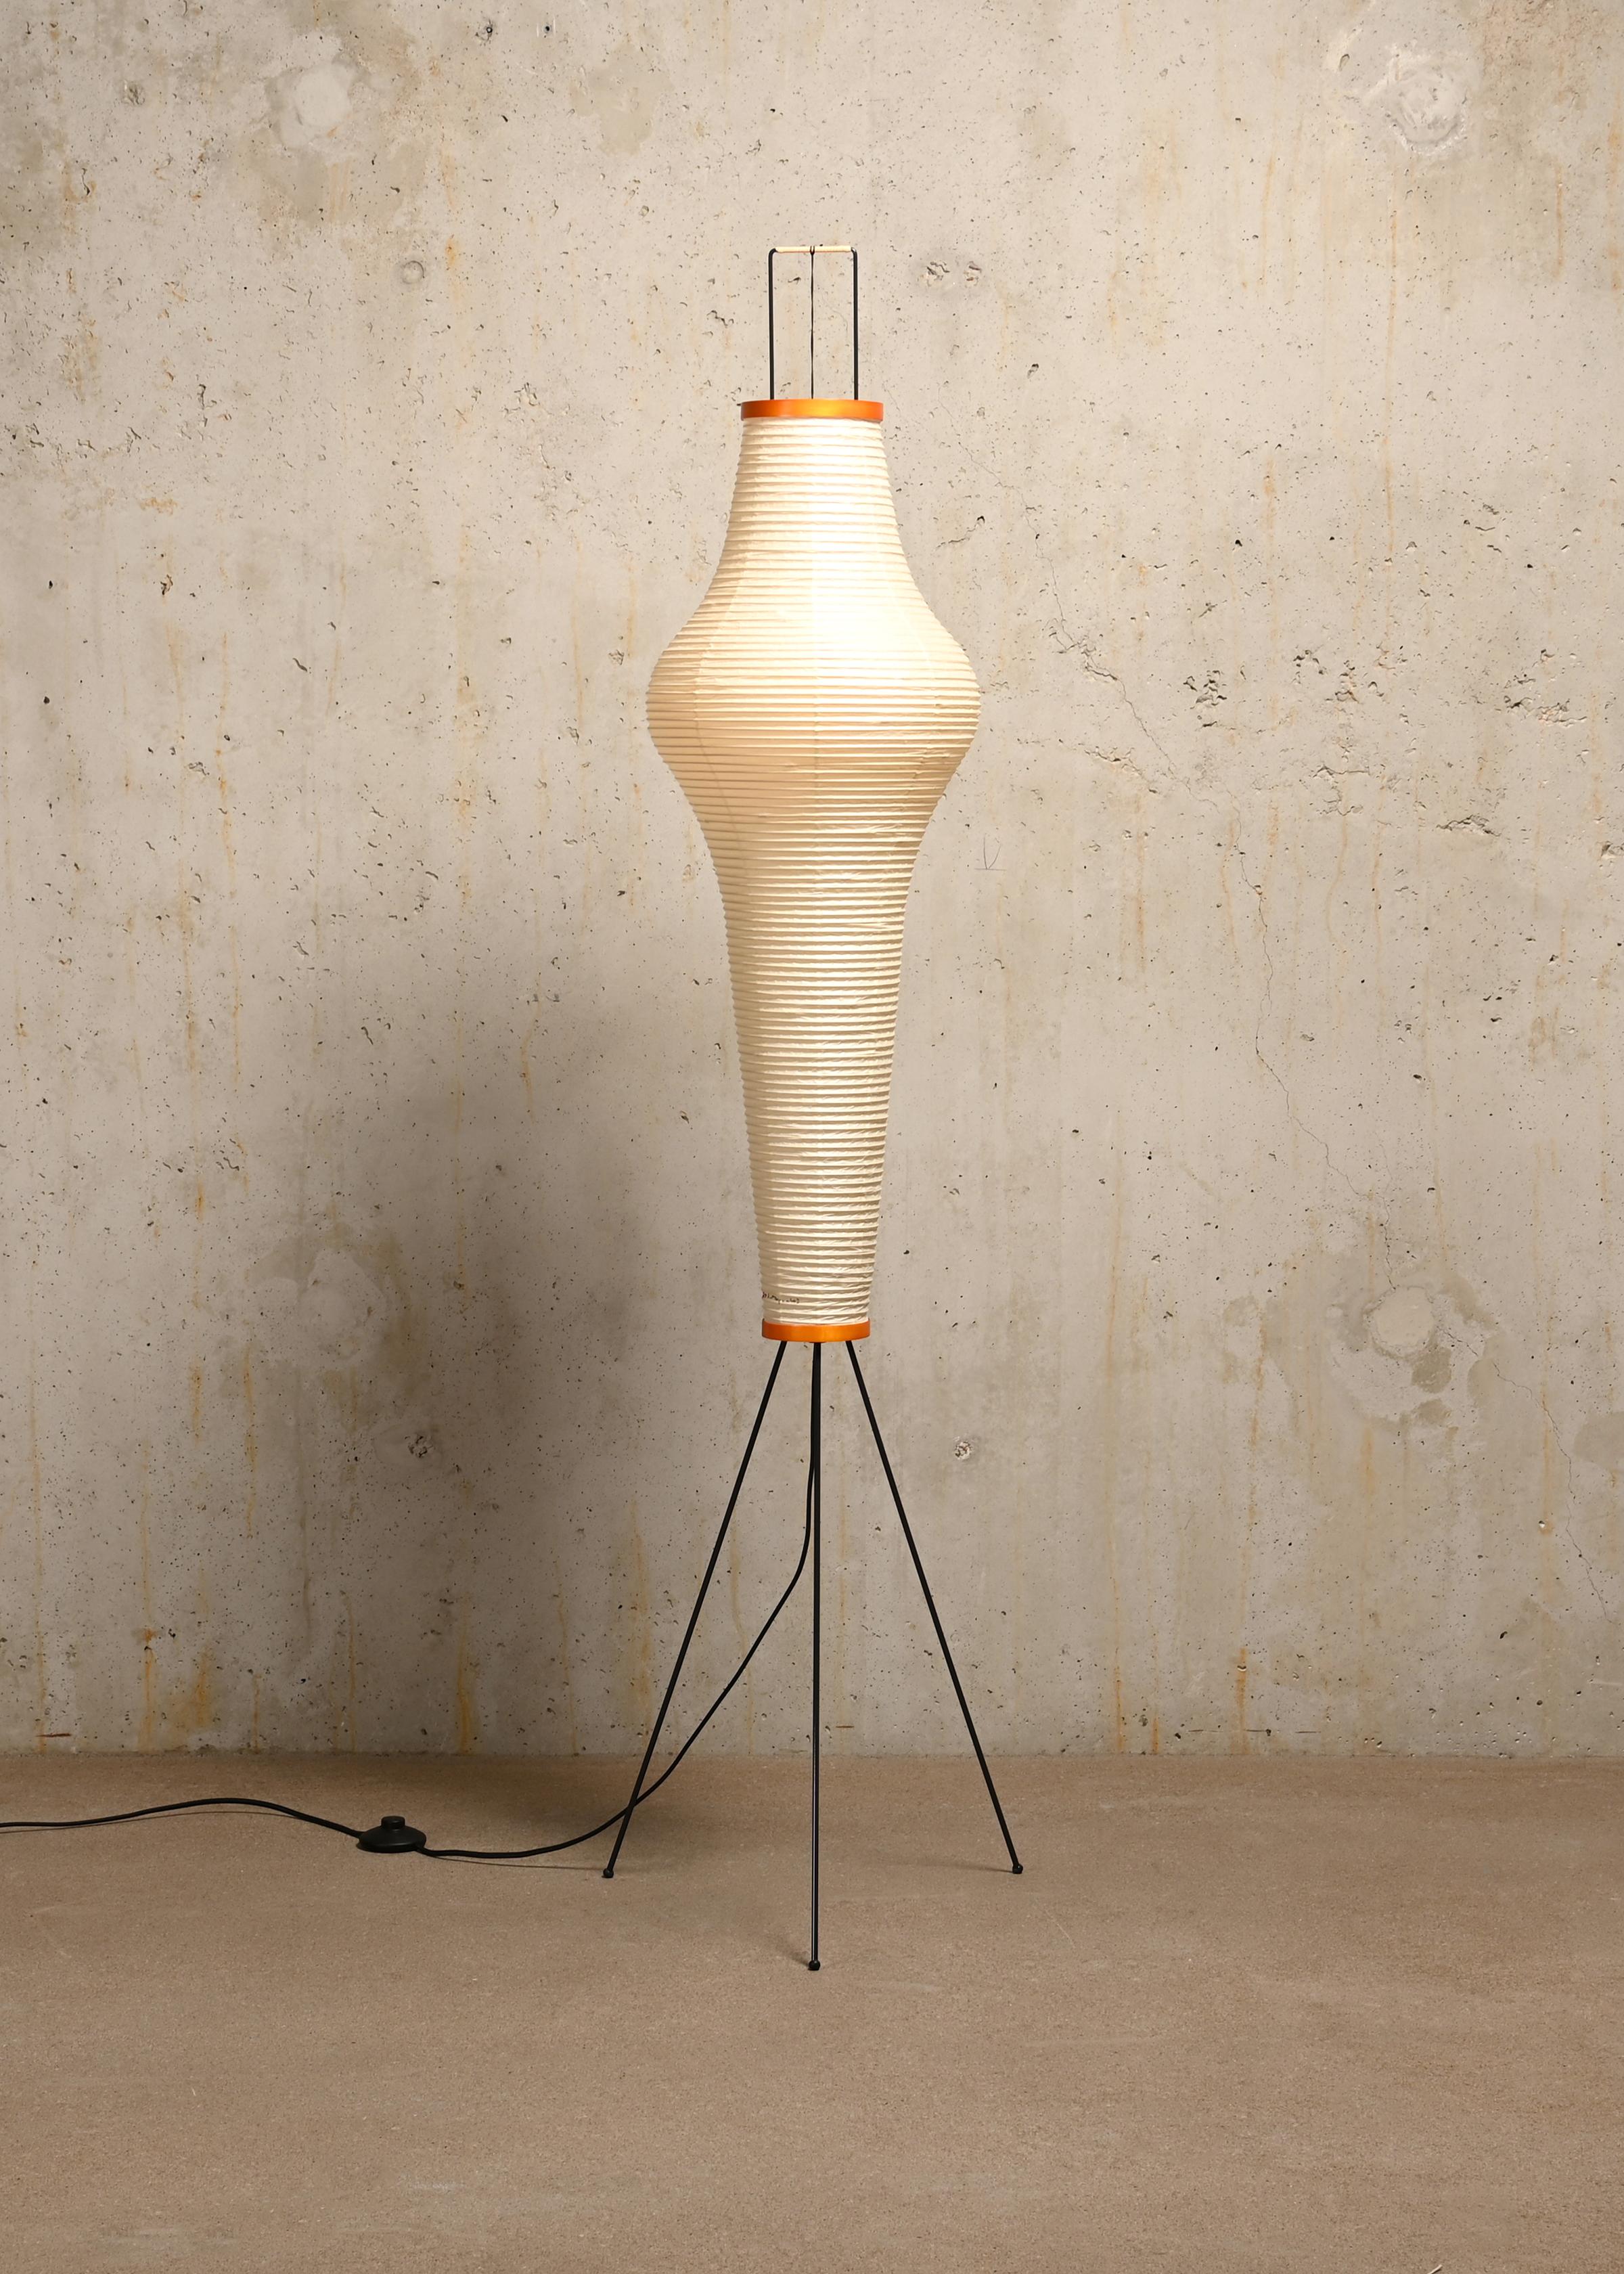 Akari light sculpture (Model 14A) by Isamu Noguchi handcrafted from traditional washi paper and bamboo. Each Akari Light Sculpture was meticulously crafted by hand in the Ozeki workshop, a traditional family-run company based in Gifu, Japan. 
The